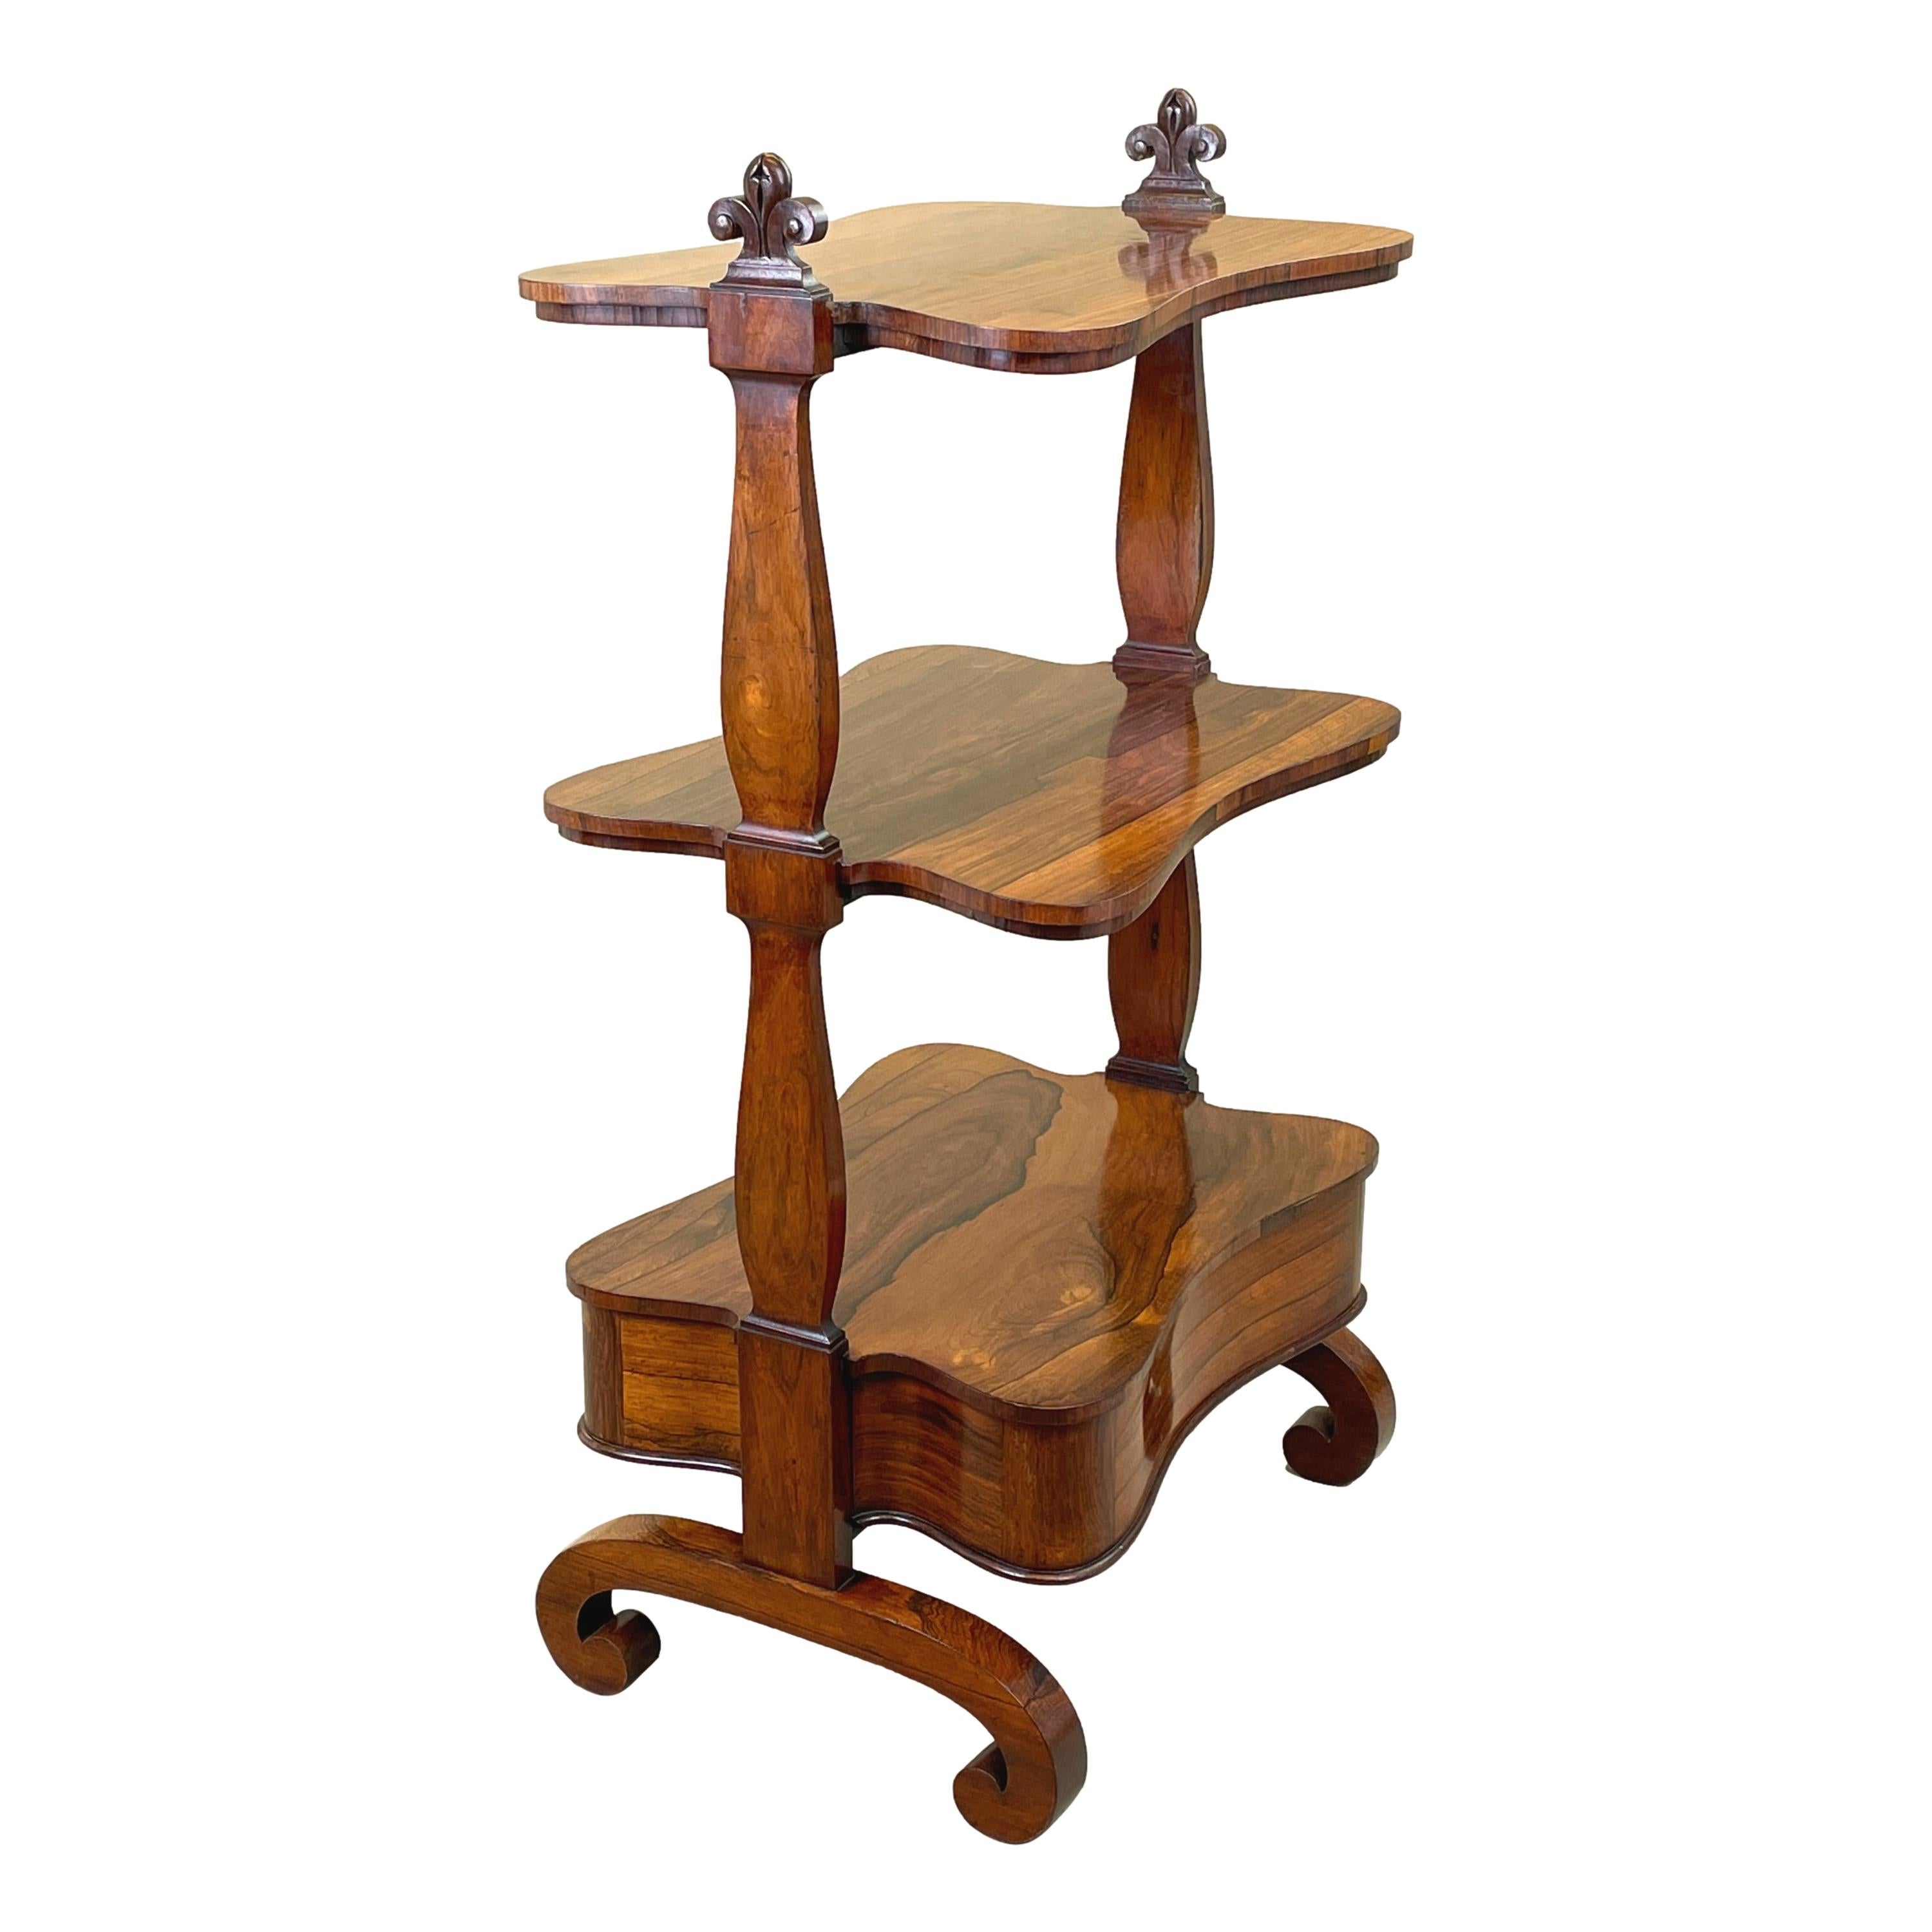 A very good quality English regency period 19th
century rosewood whatnot of unusual shape having
three well figured tiers united by elegant silhouette
end supports over one mahogany lined drawer
retaining original turned wooden knobs

(This